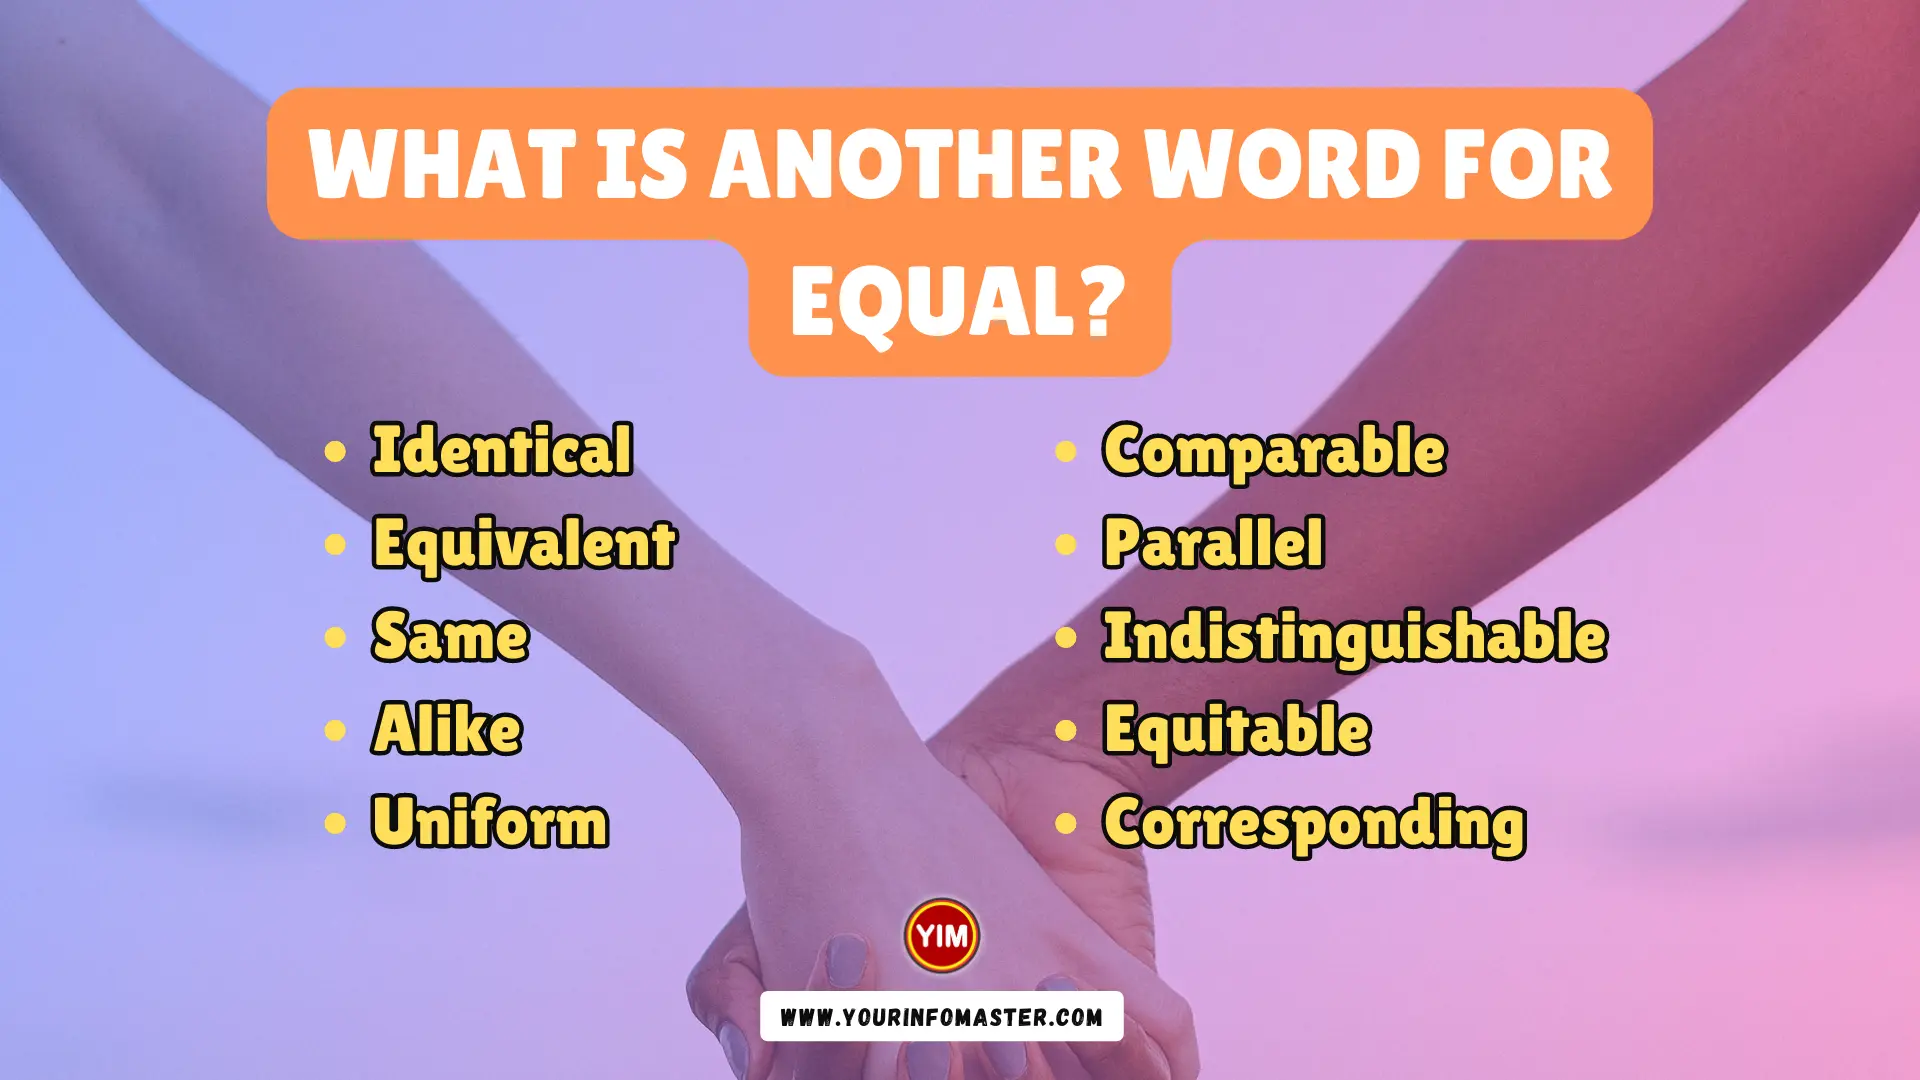 What is another word for Equal